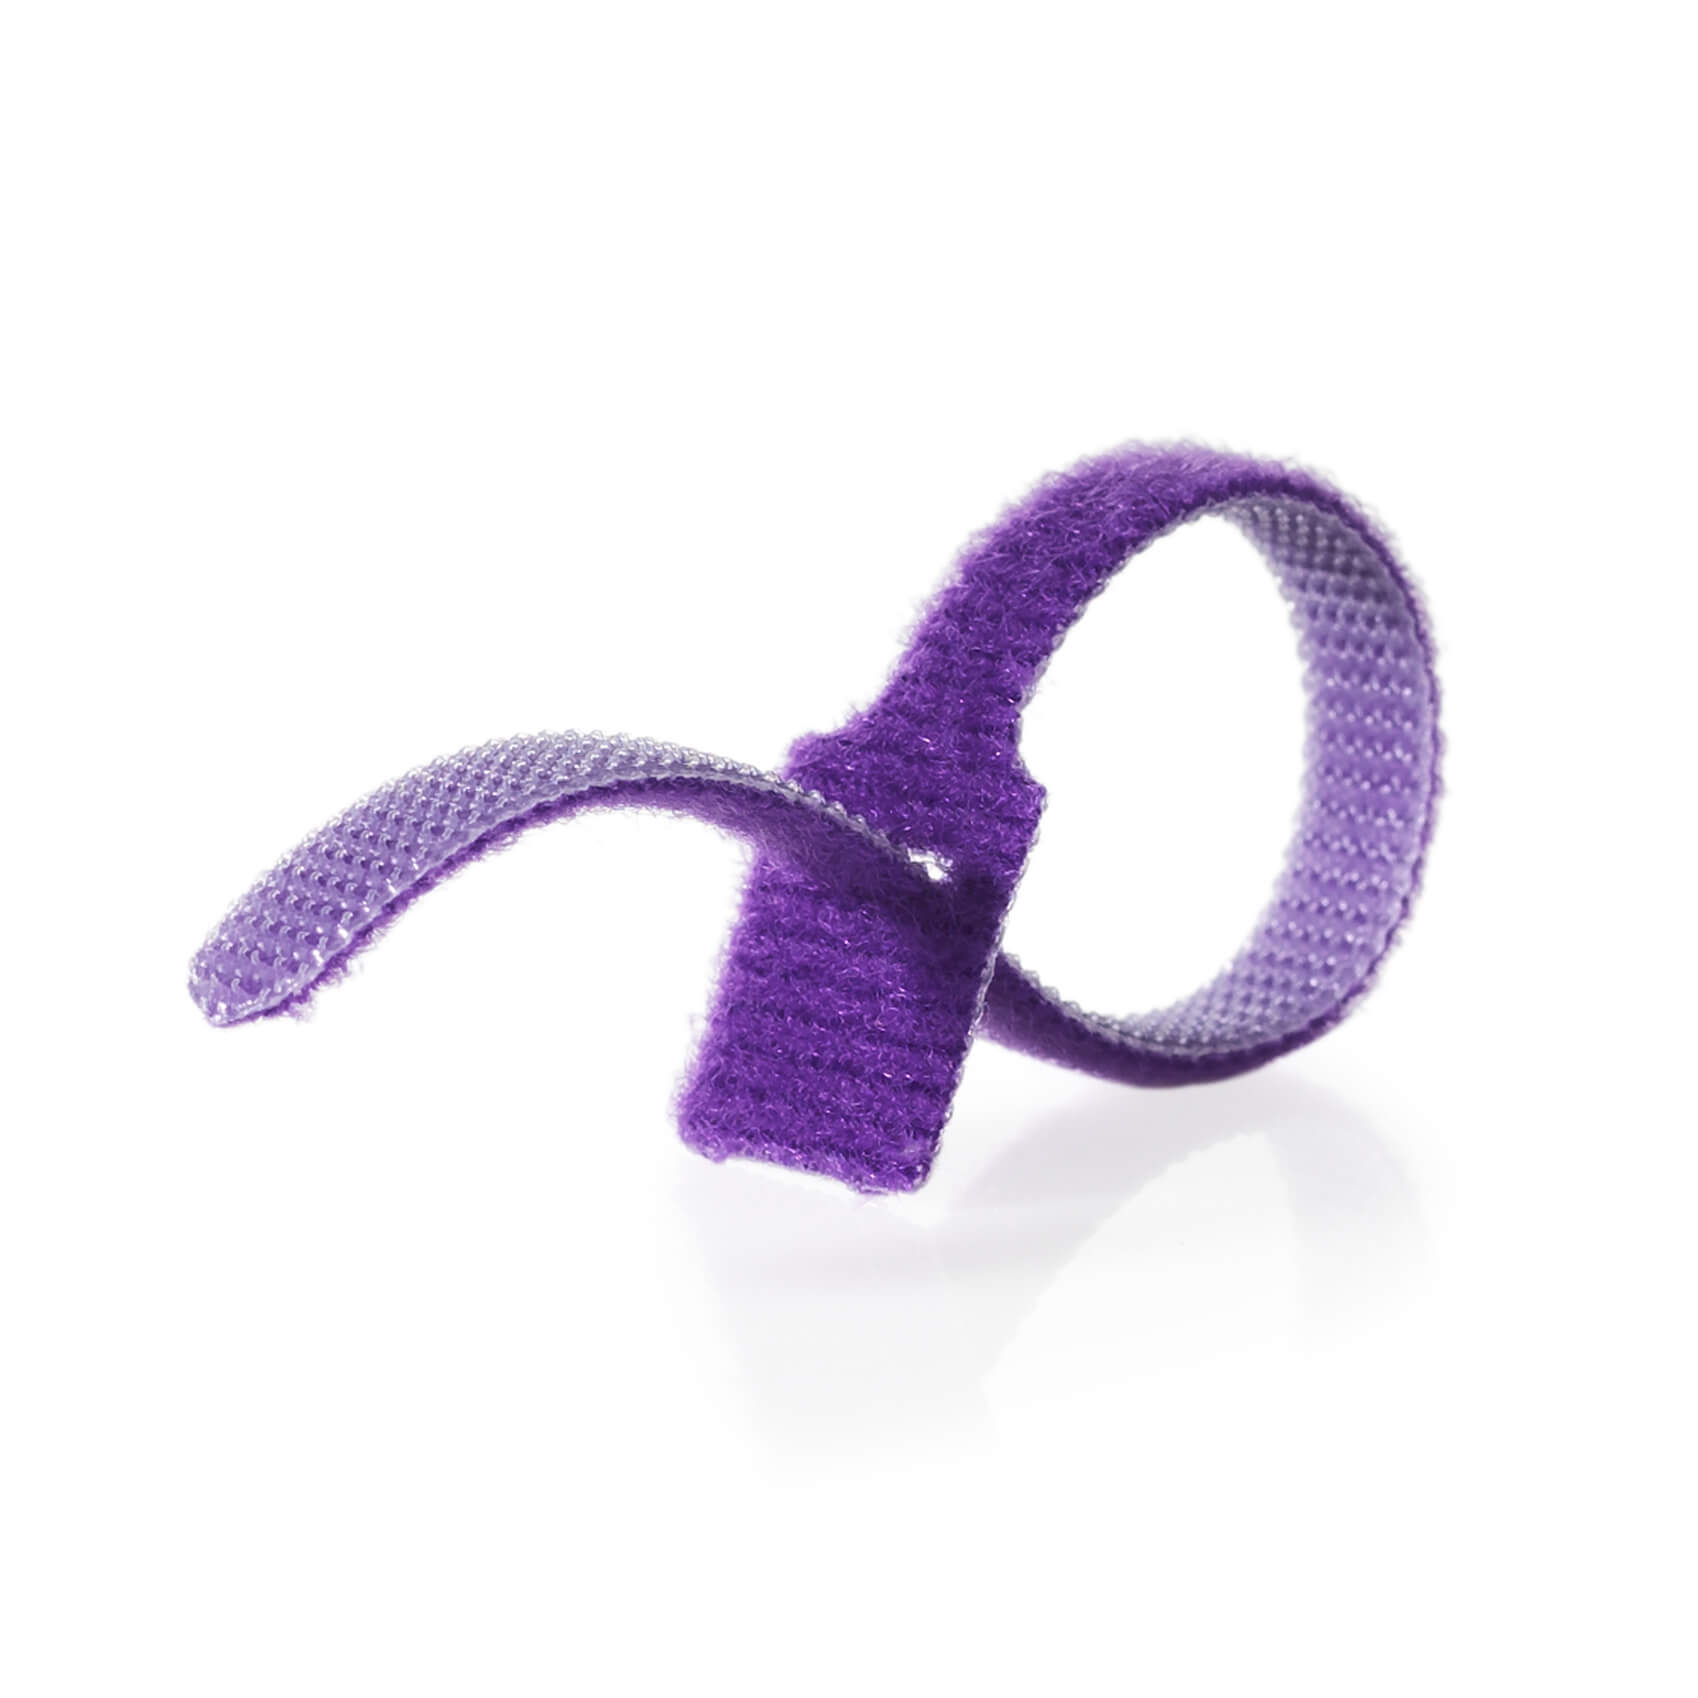 VELCRO® Brand ONE-WRAP® Reusable Cable Ties 20mm x 200mm x 750 - Purple